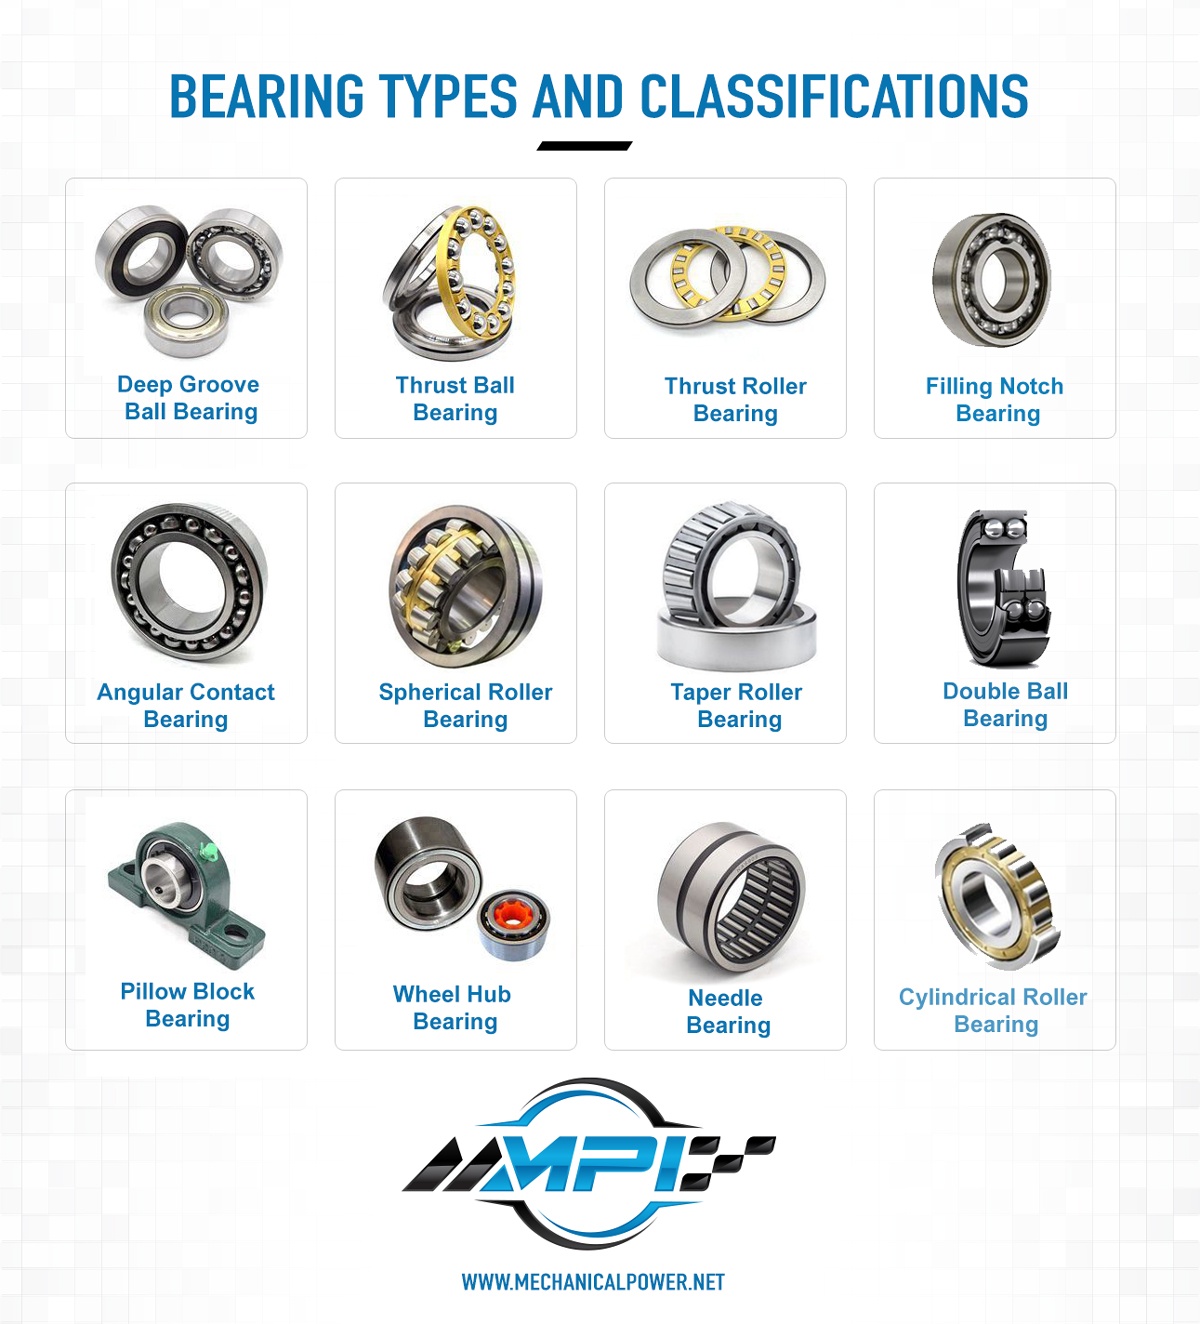 Bearing-Types-and-Classifications_Infographic